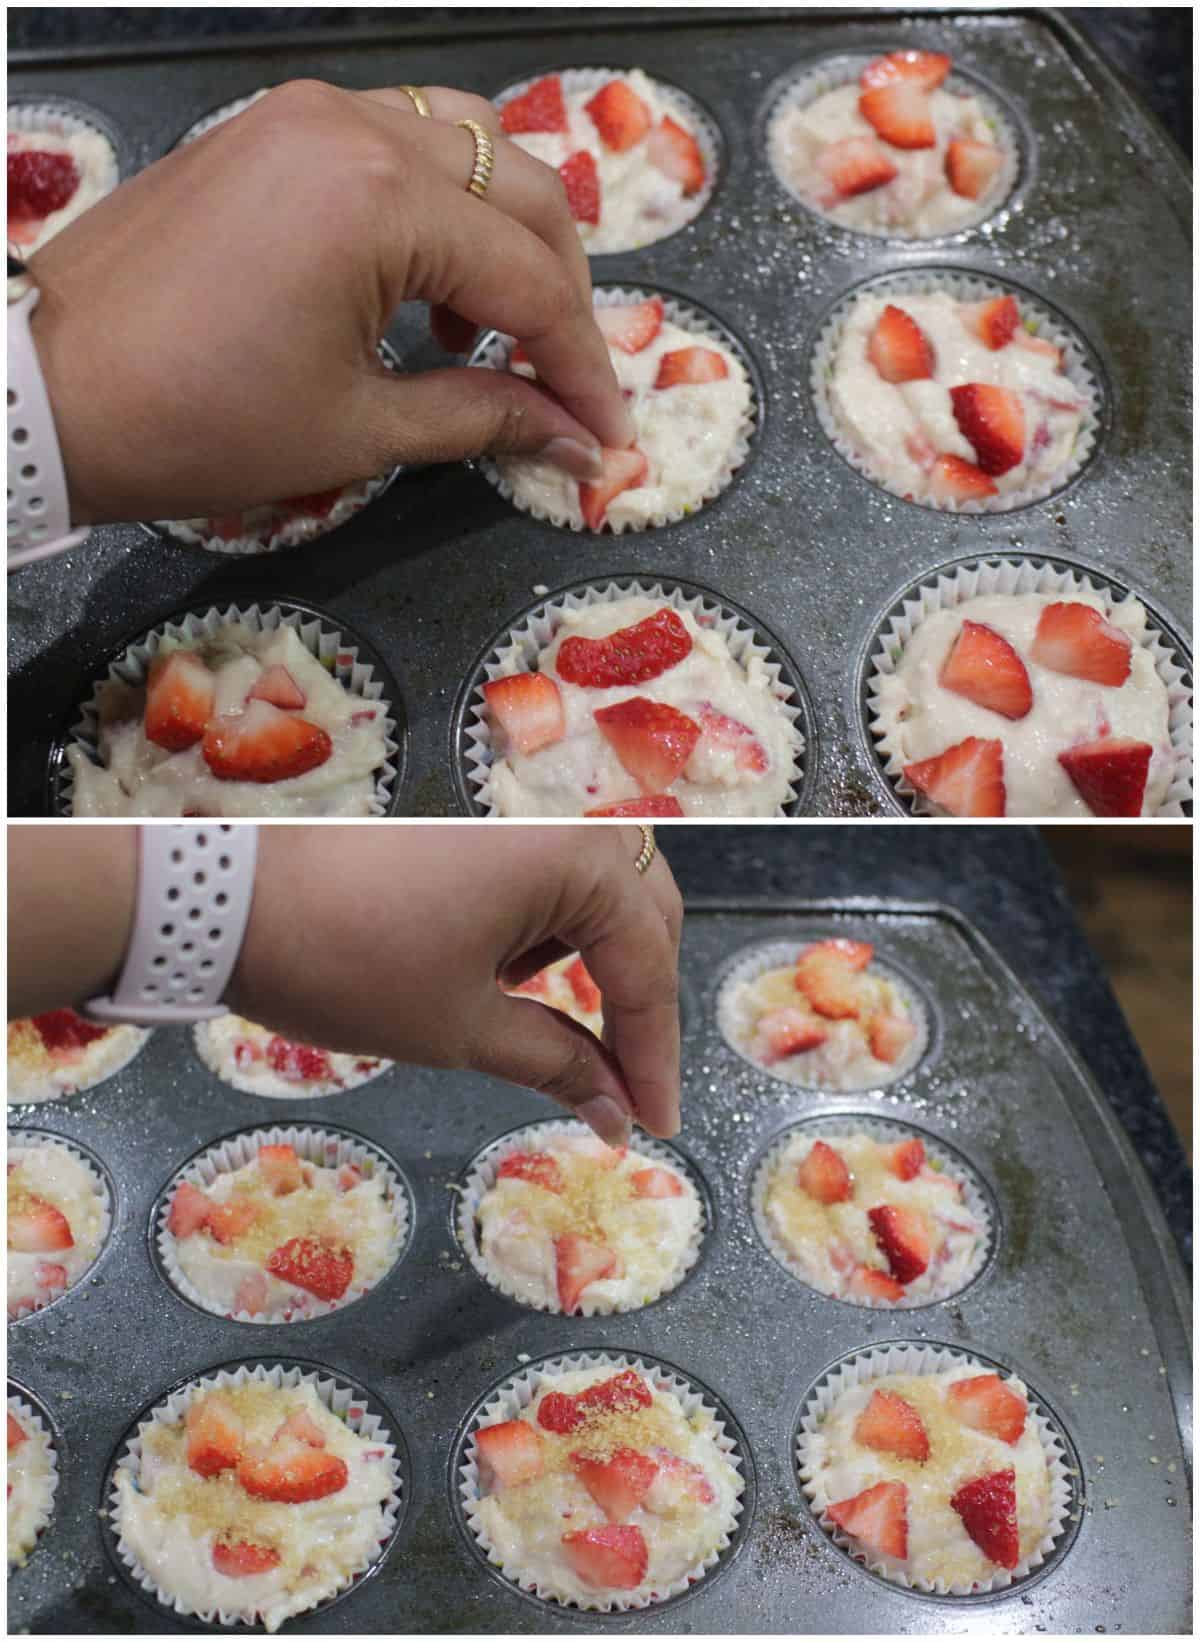 Placing strawberry pieces on top of muffin batter and sprinkling sugar.